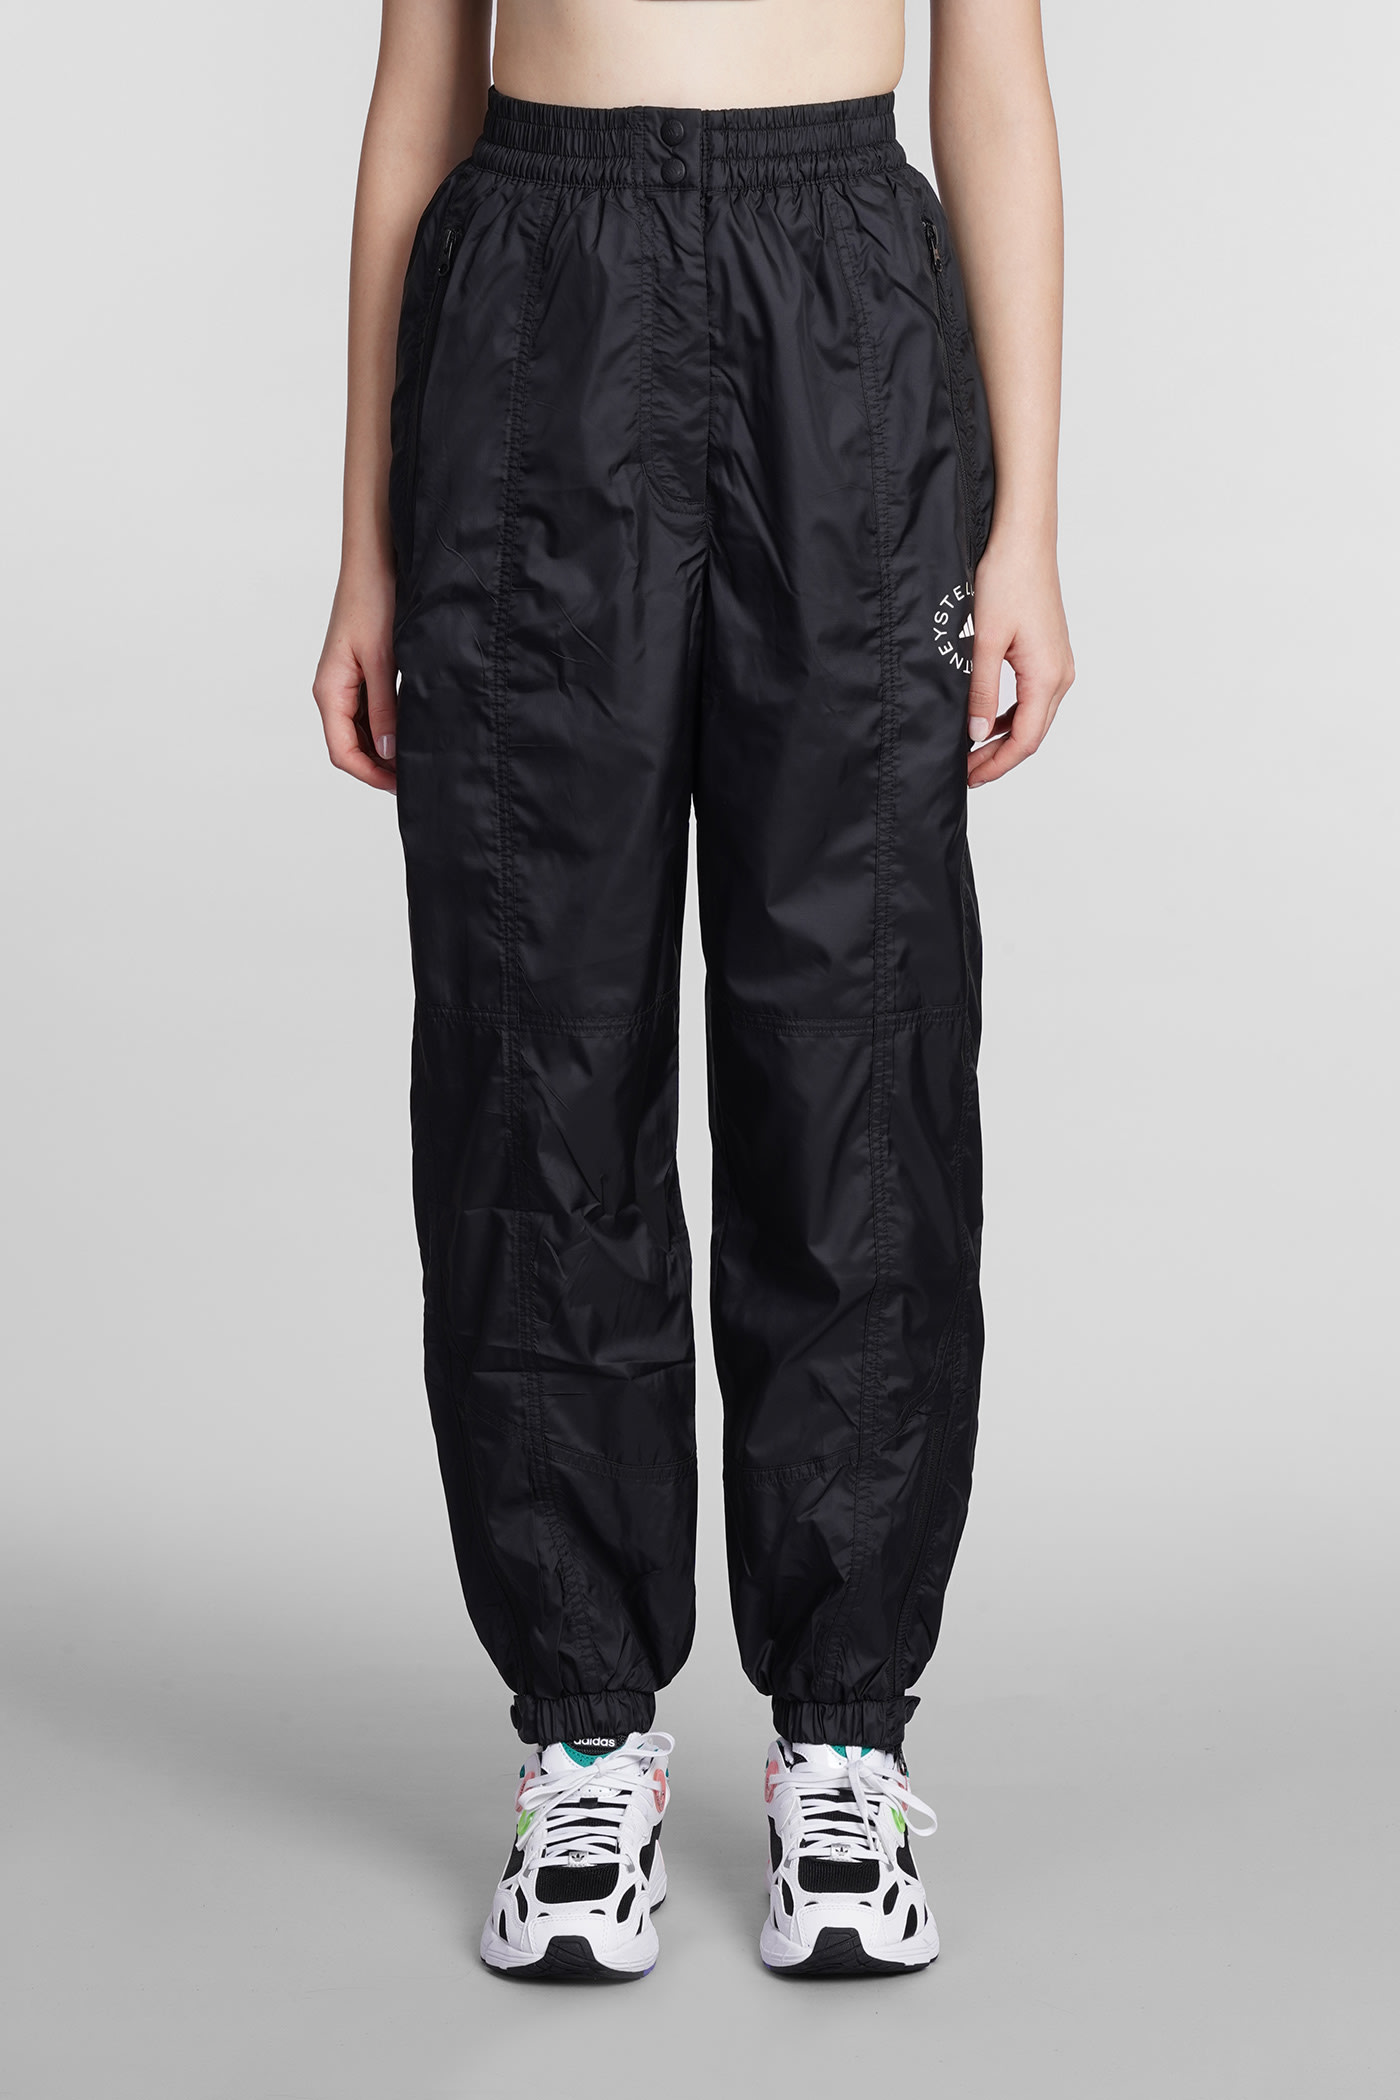 Adidas by Stella McCartney Pants In Black Polyester